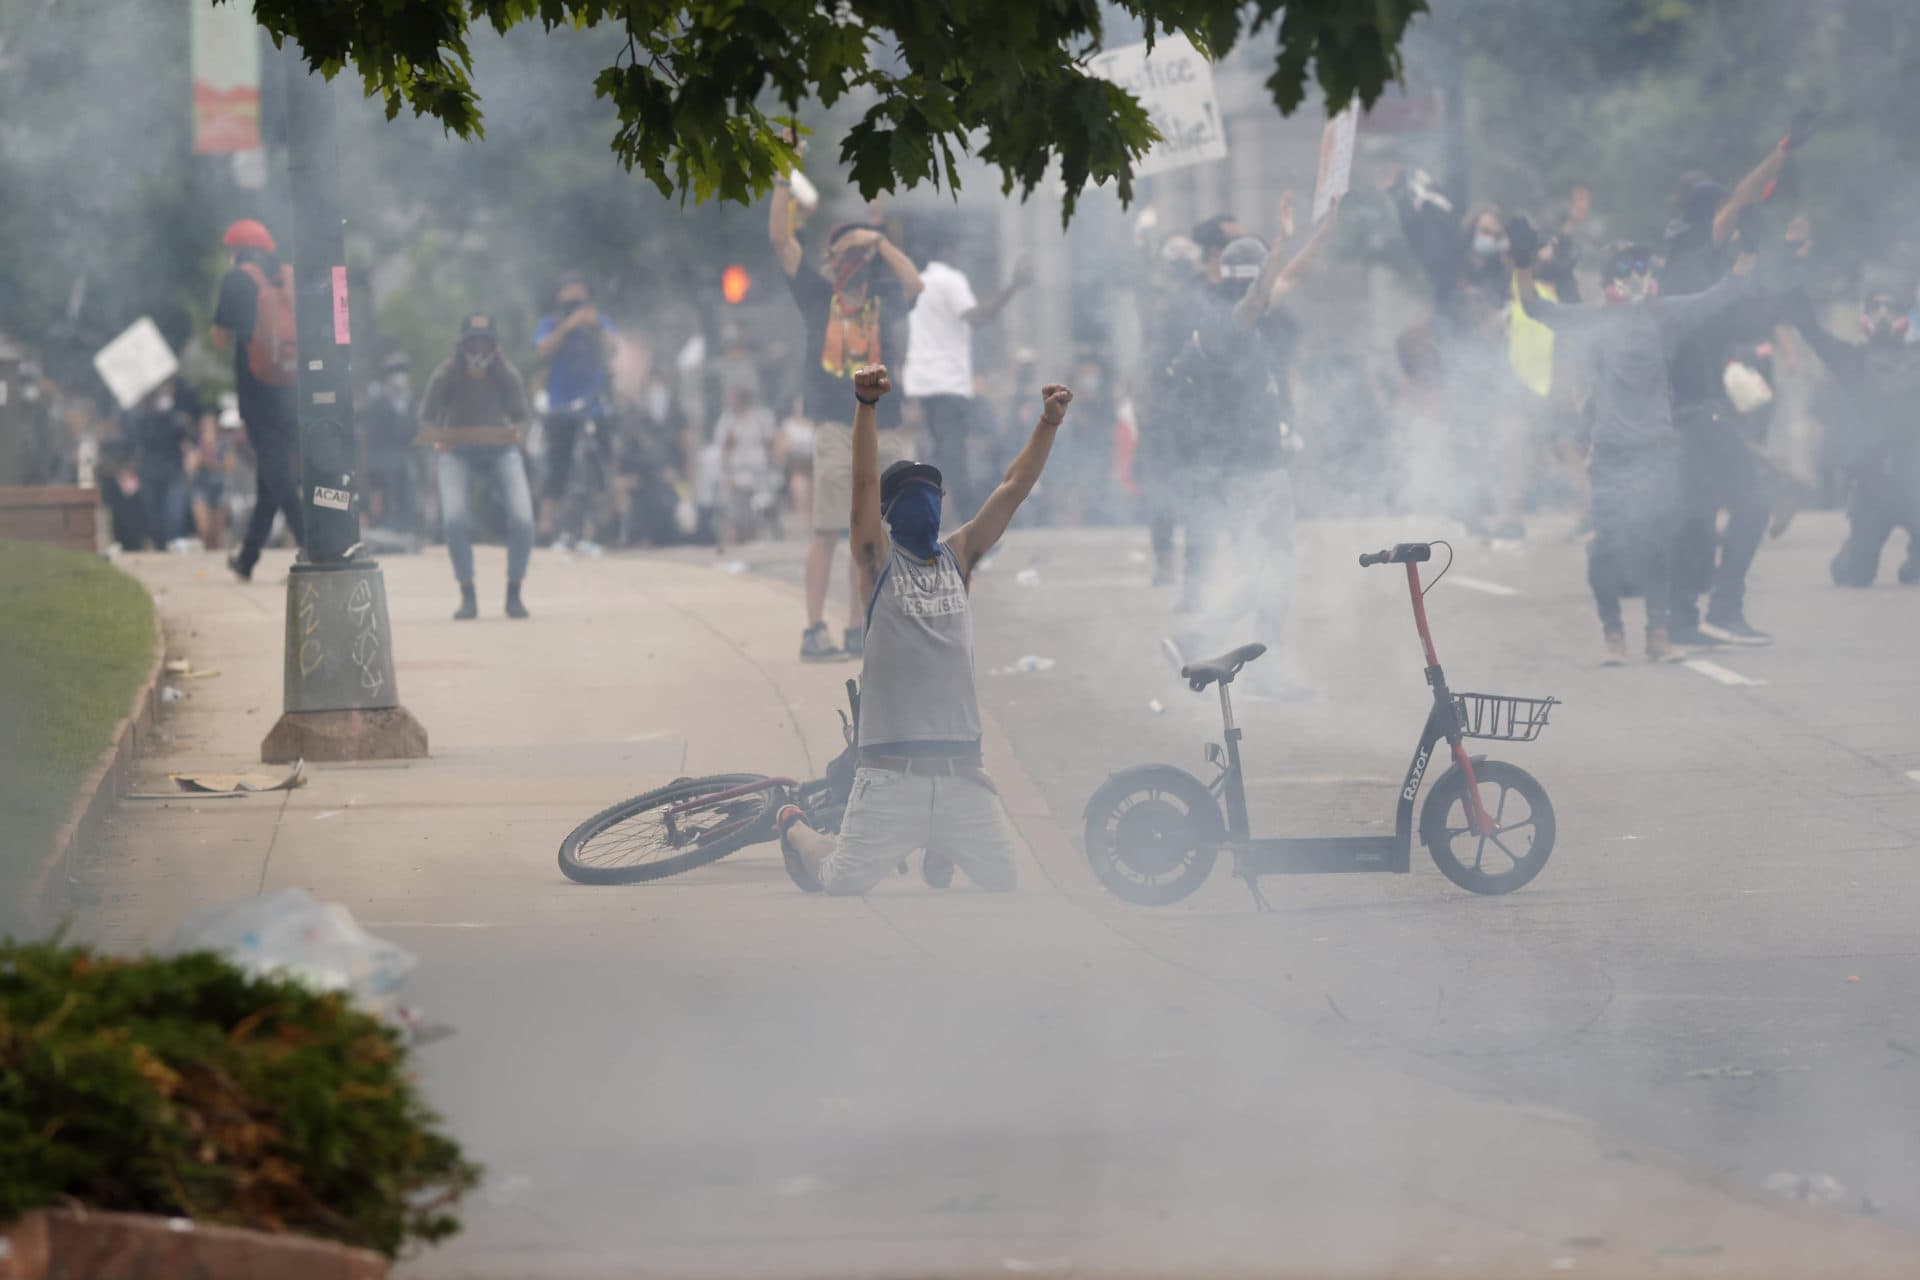 Tear gas fills the air after Denver Police fired canisters during a protest outside the State Capitol over the death of George Floyd, Saturday, May 30, 2020, in Denver. Protests were held in U.S. cities over the death of Floyd, a black man who died after being restrained by Minneapolis police officers on May 25. (AP Photo/David Zalubowski)